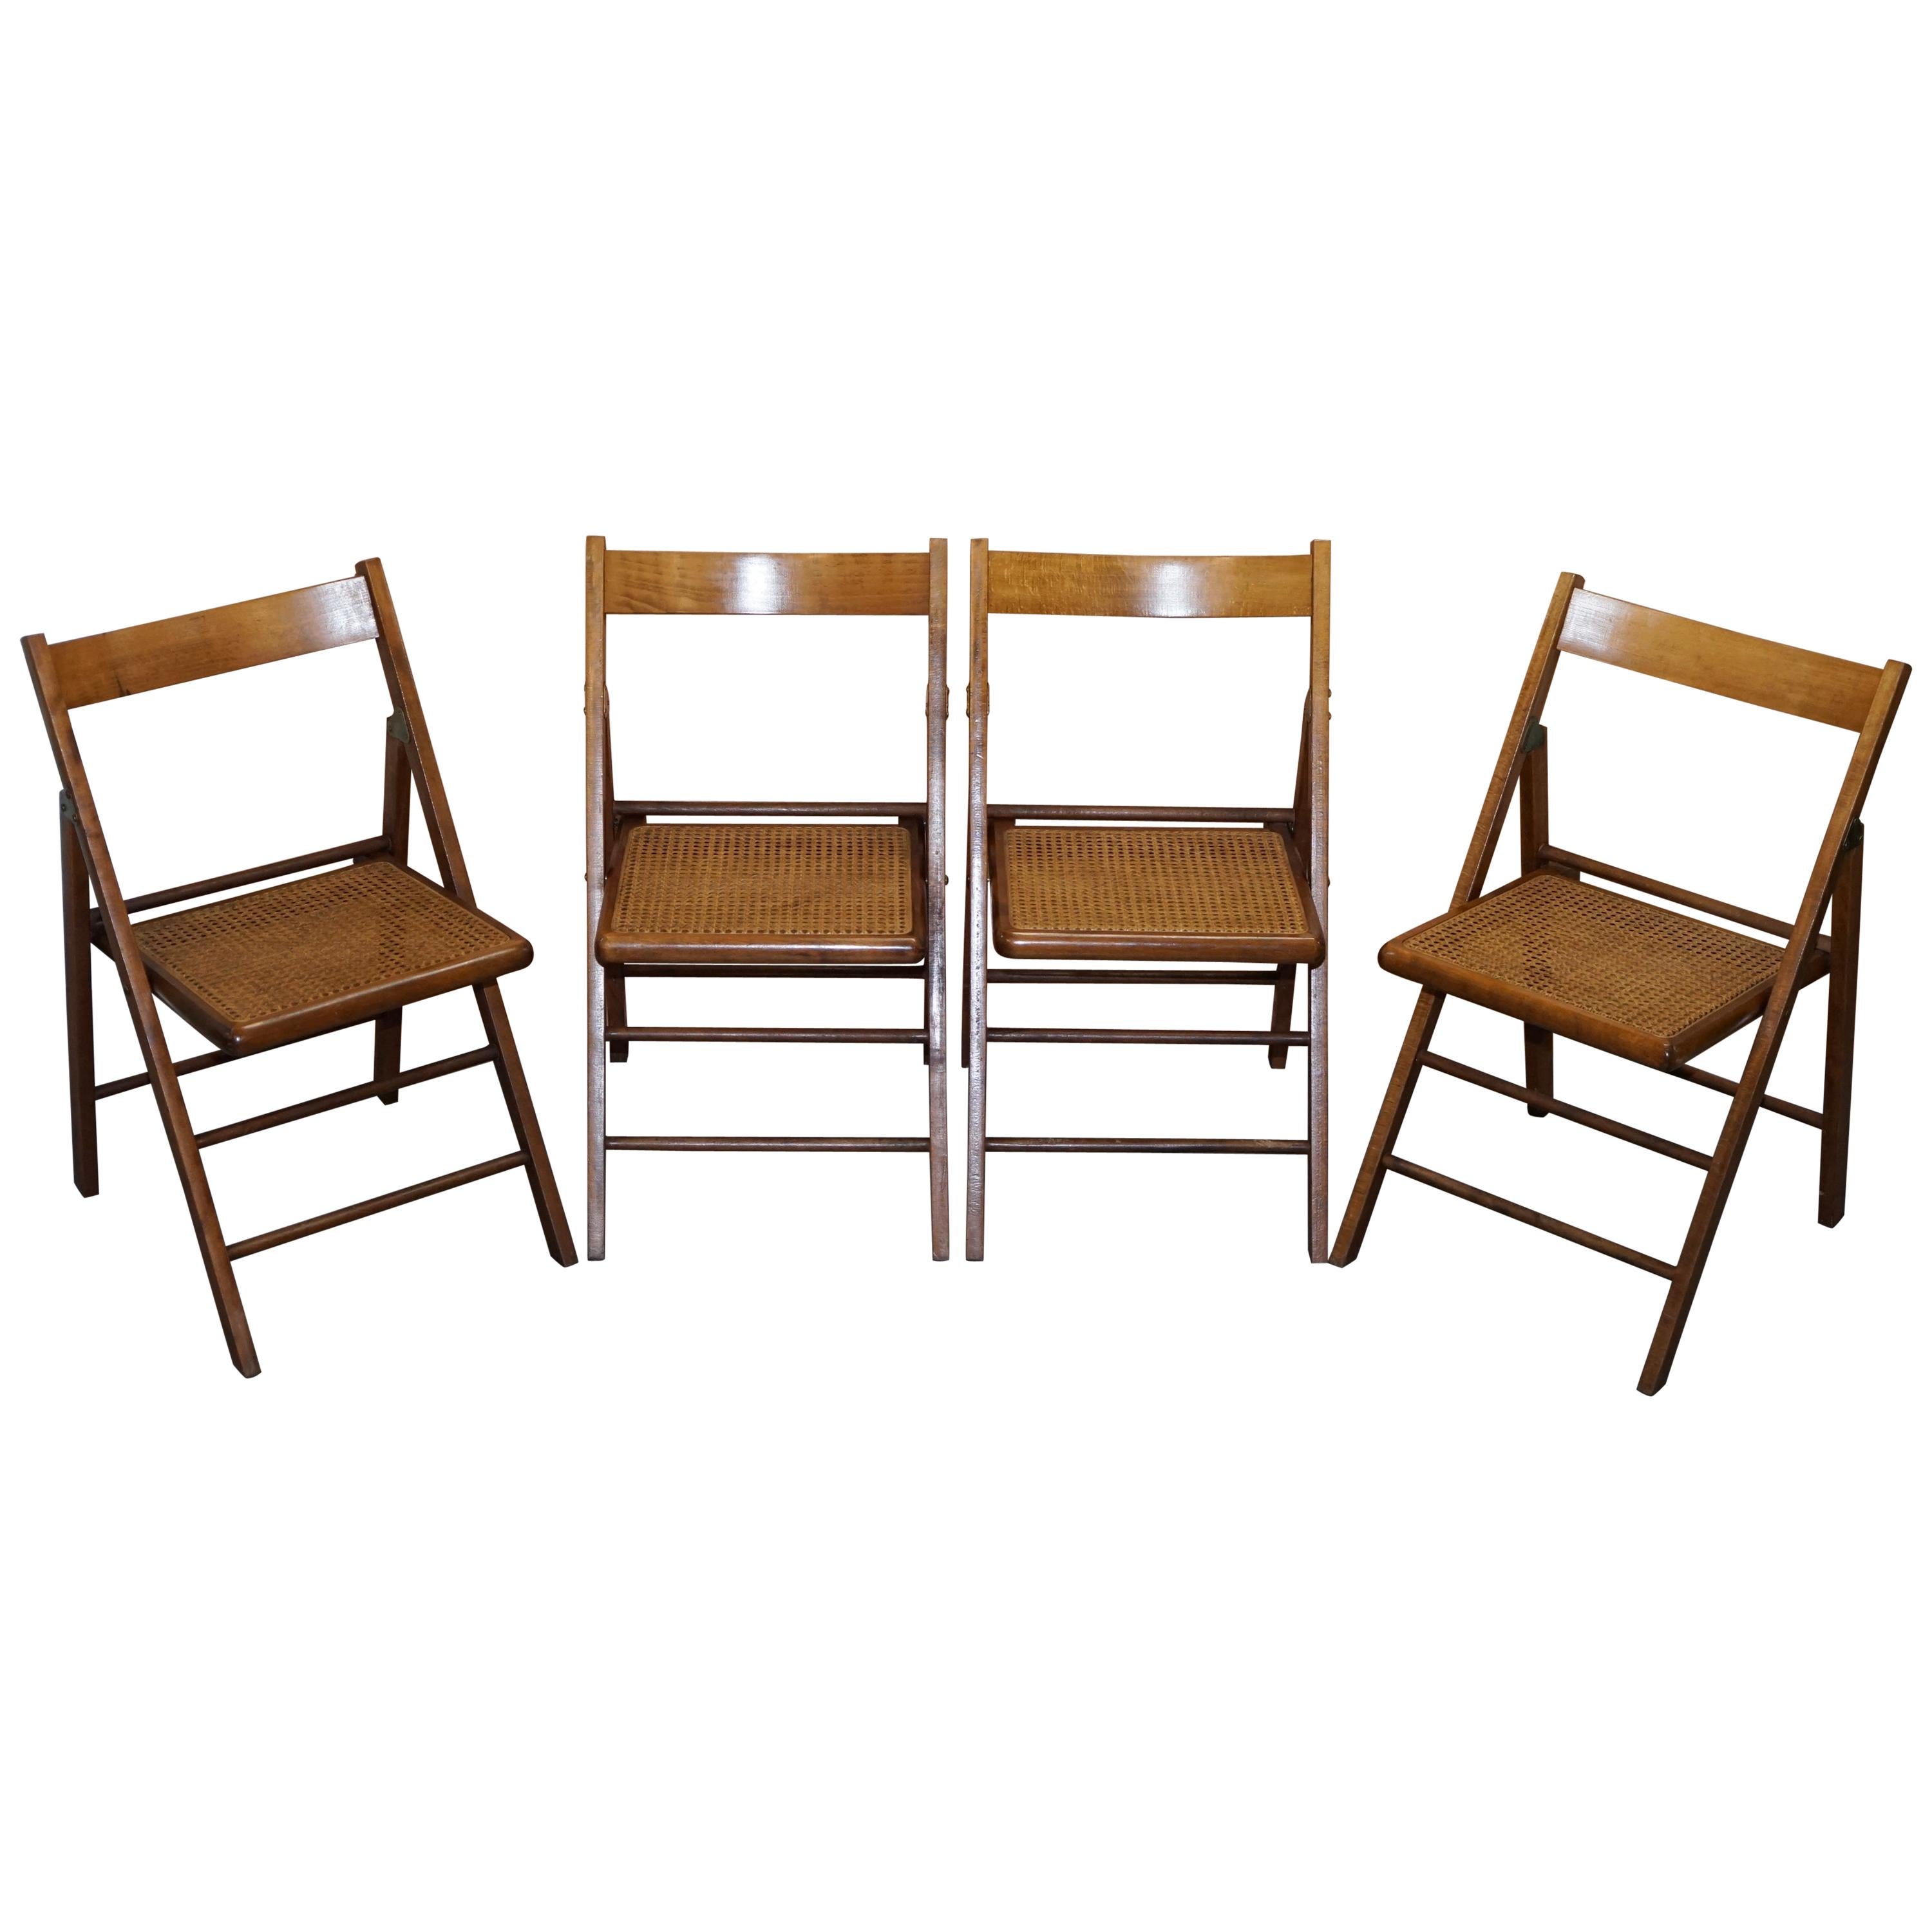 Set of Four Vintage English Military Campaign Folding Chairs Berger Rattan Seat